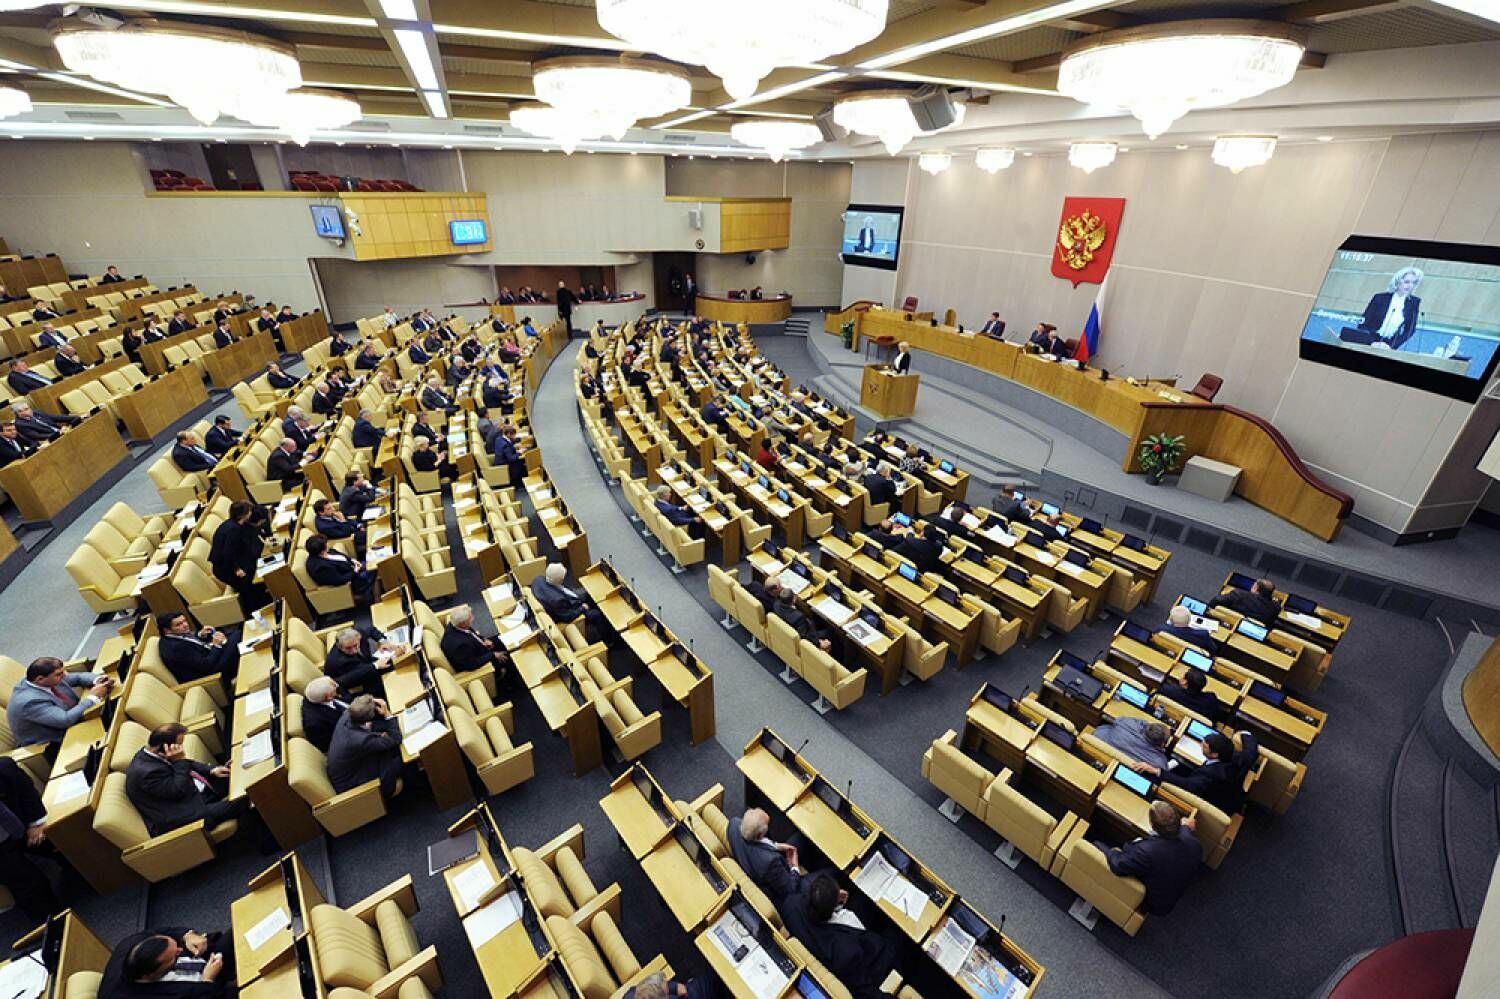 State Duma deputies of the eighth convocation held the first meeting